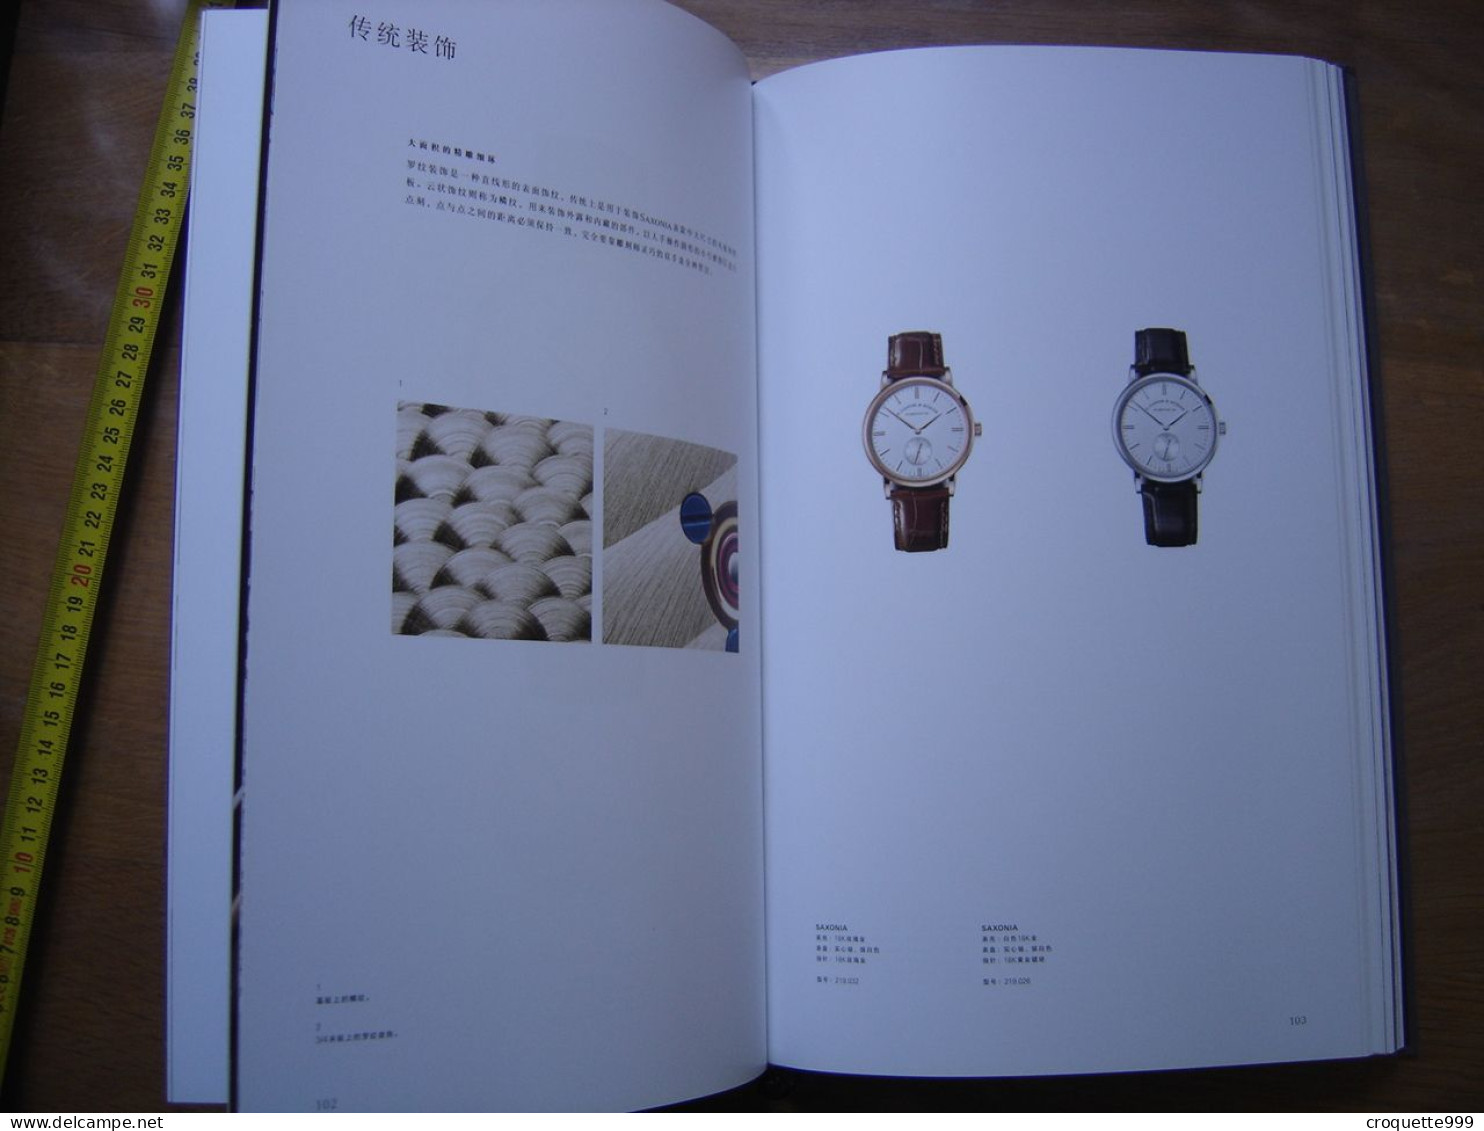 Catalogue Avec Price List Montres LANGE SOHNE 2017 En CHINOIS Artbook Watches - Watches: Top-of-the-Line